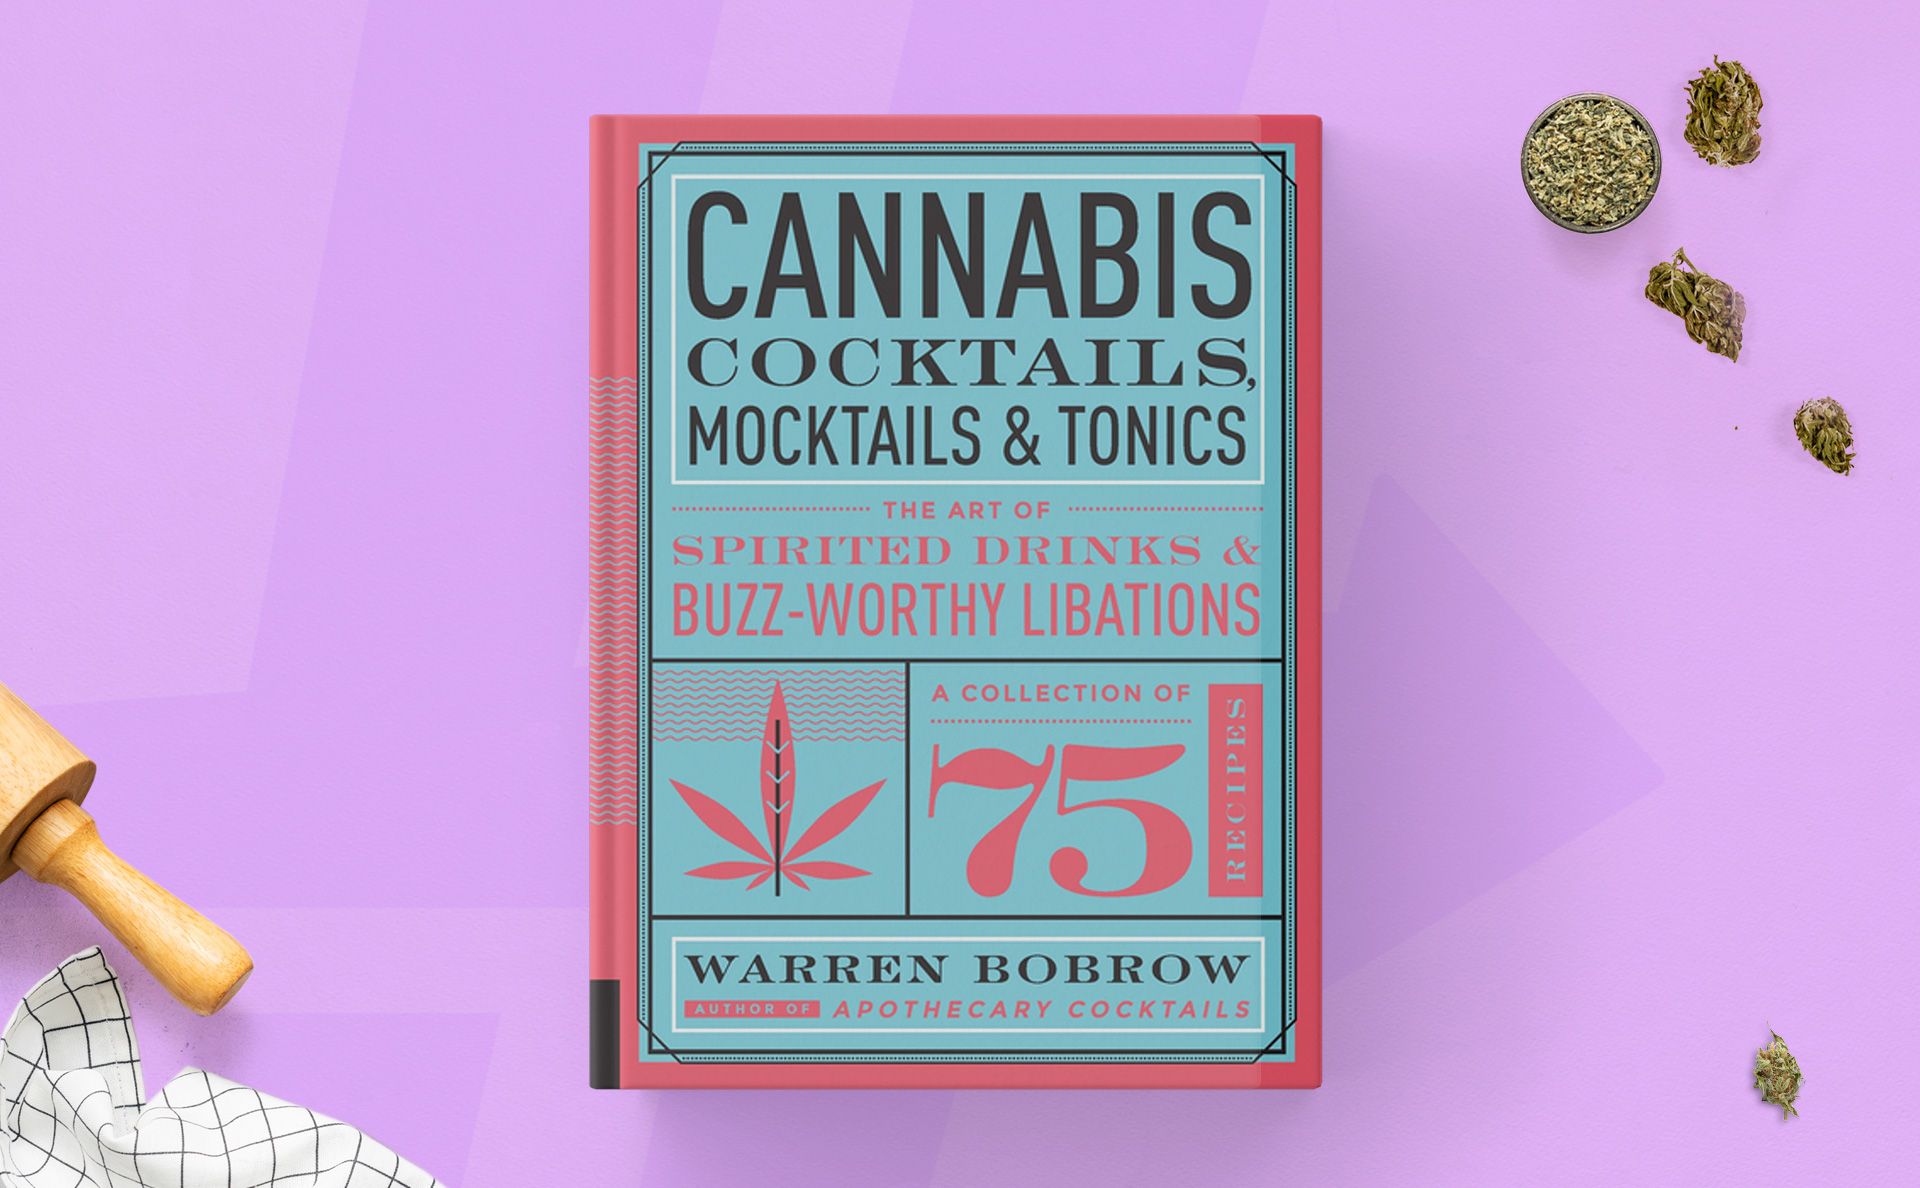 Cannabis Cocktails, Mocktails, and Tonics by Warren Bobrow.jpg